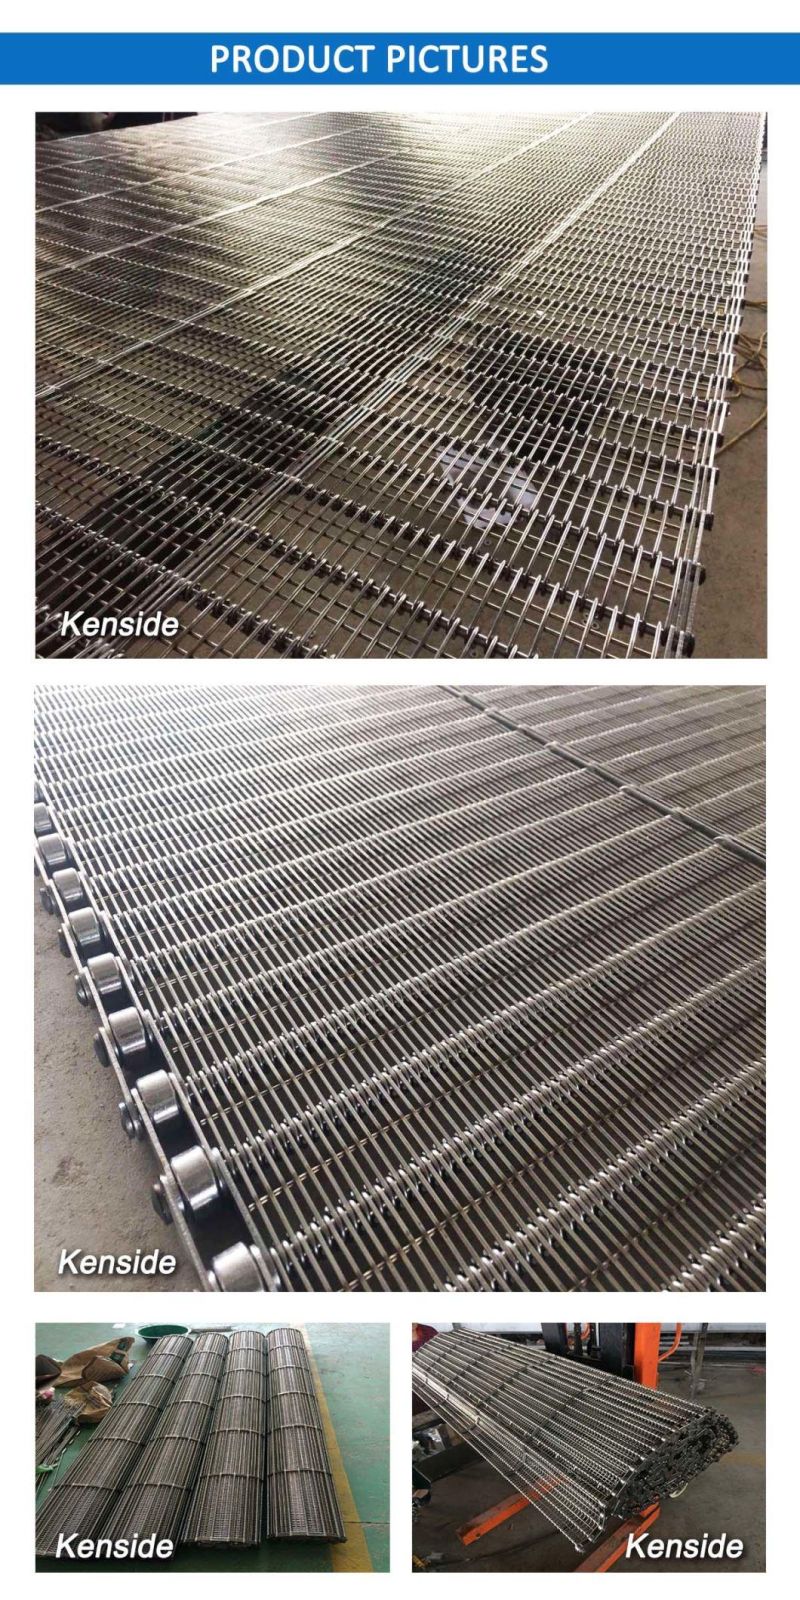 Stainless Steel Eye Link Belt for Conveying Fragile Products